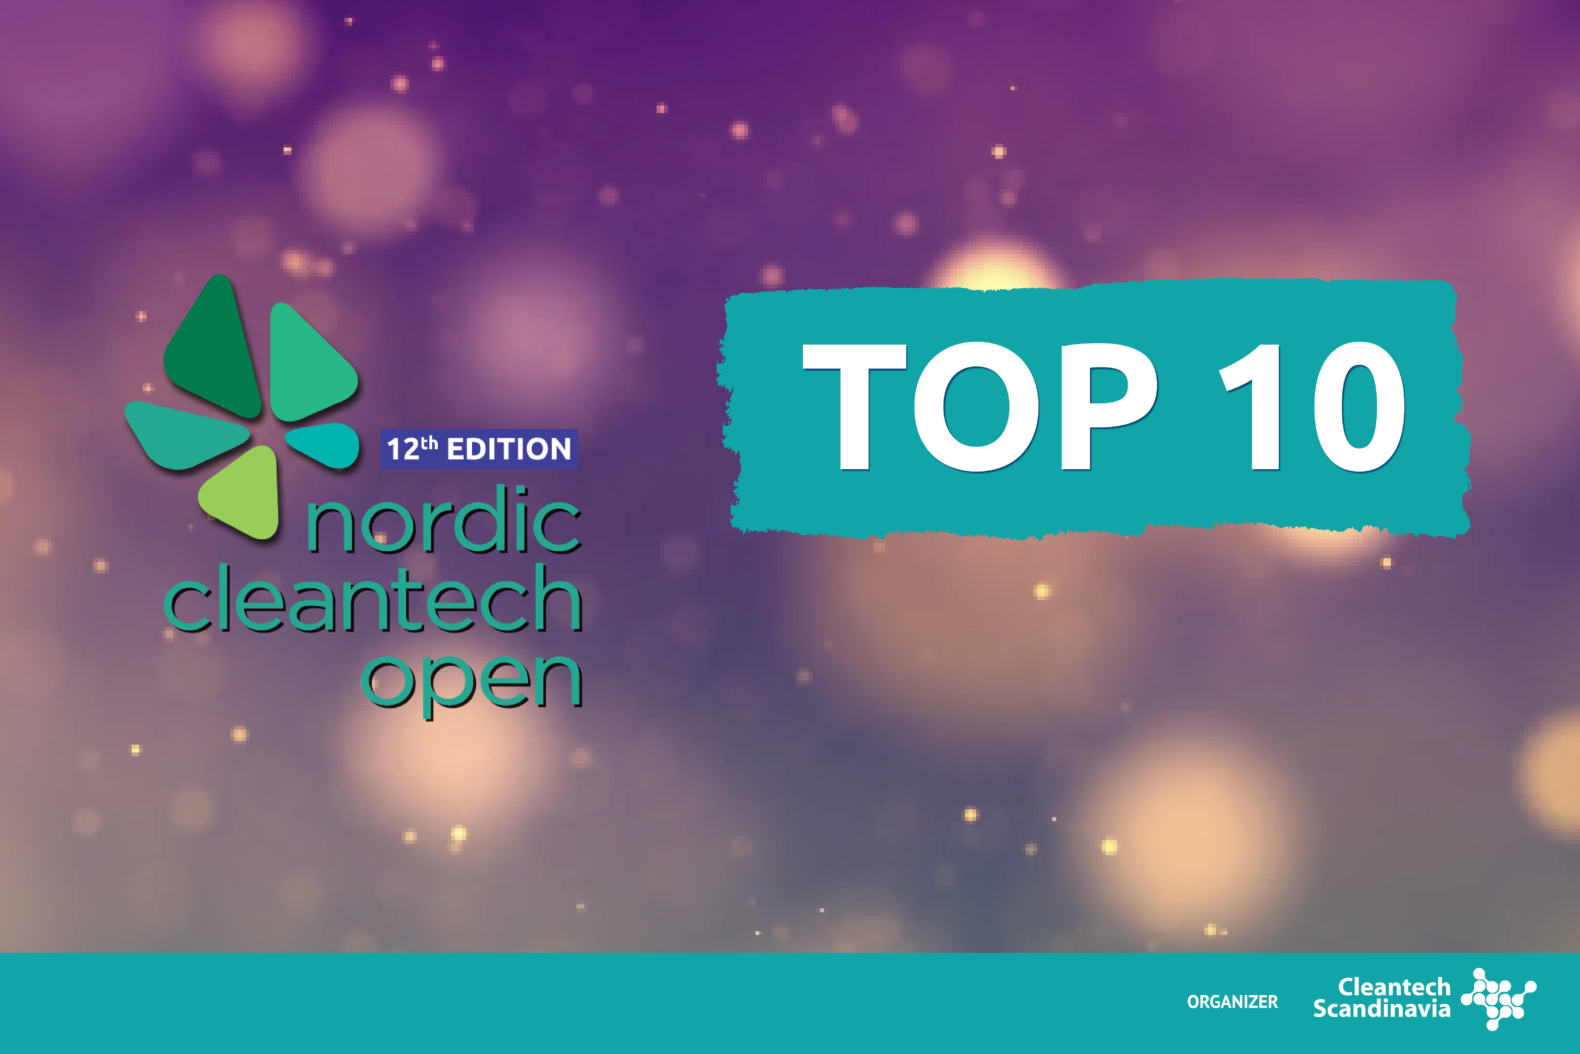 Meet the TOP 10 selected companies of the 12th Nordic Cleantech Open